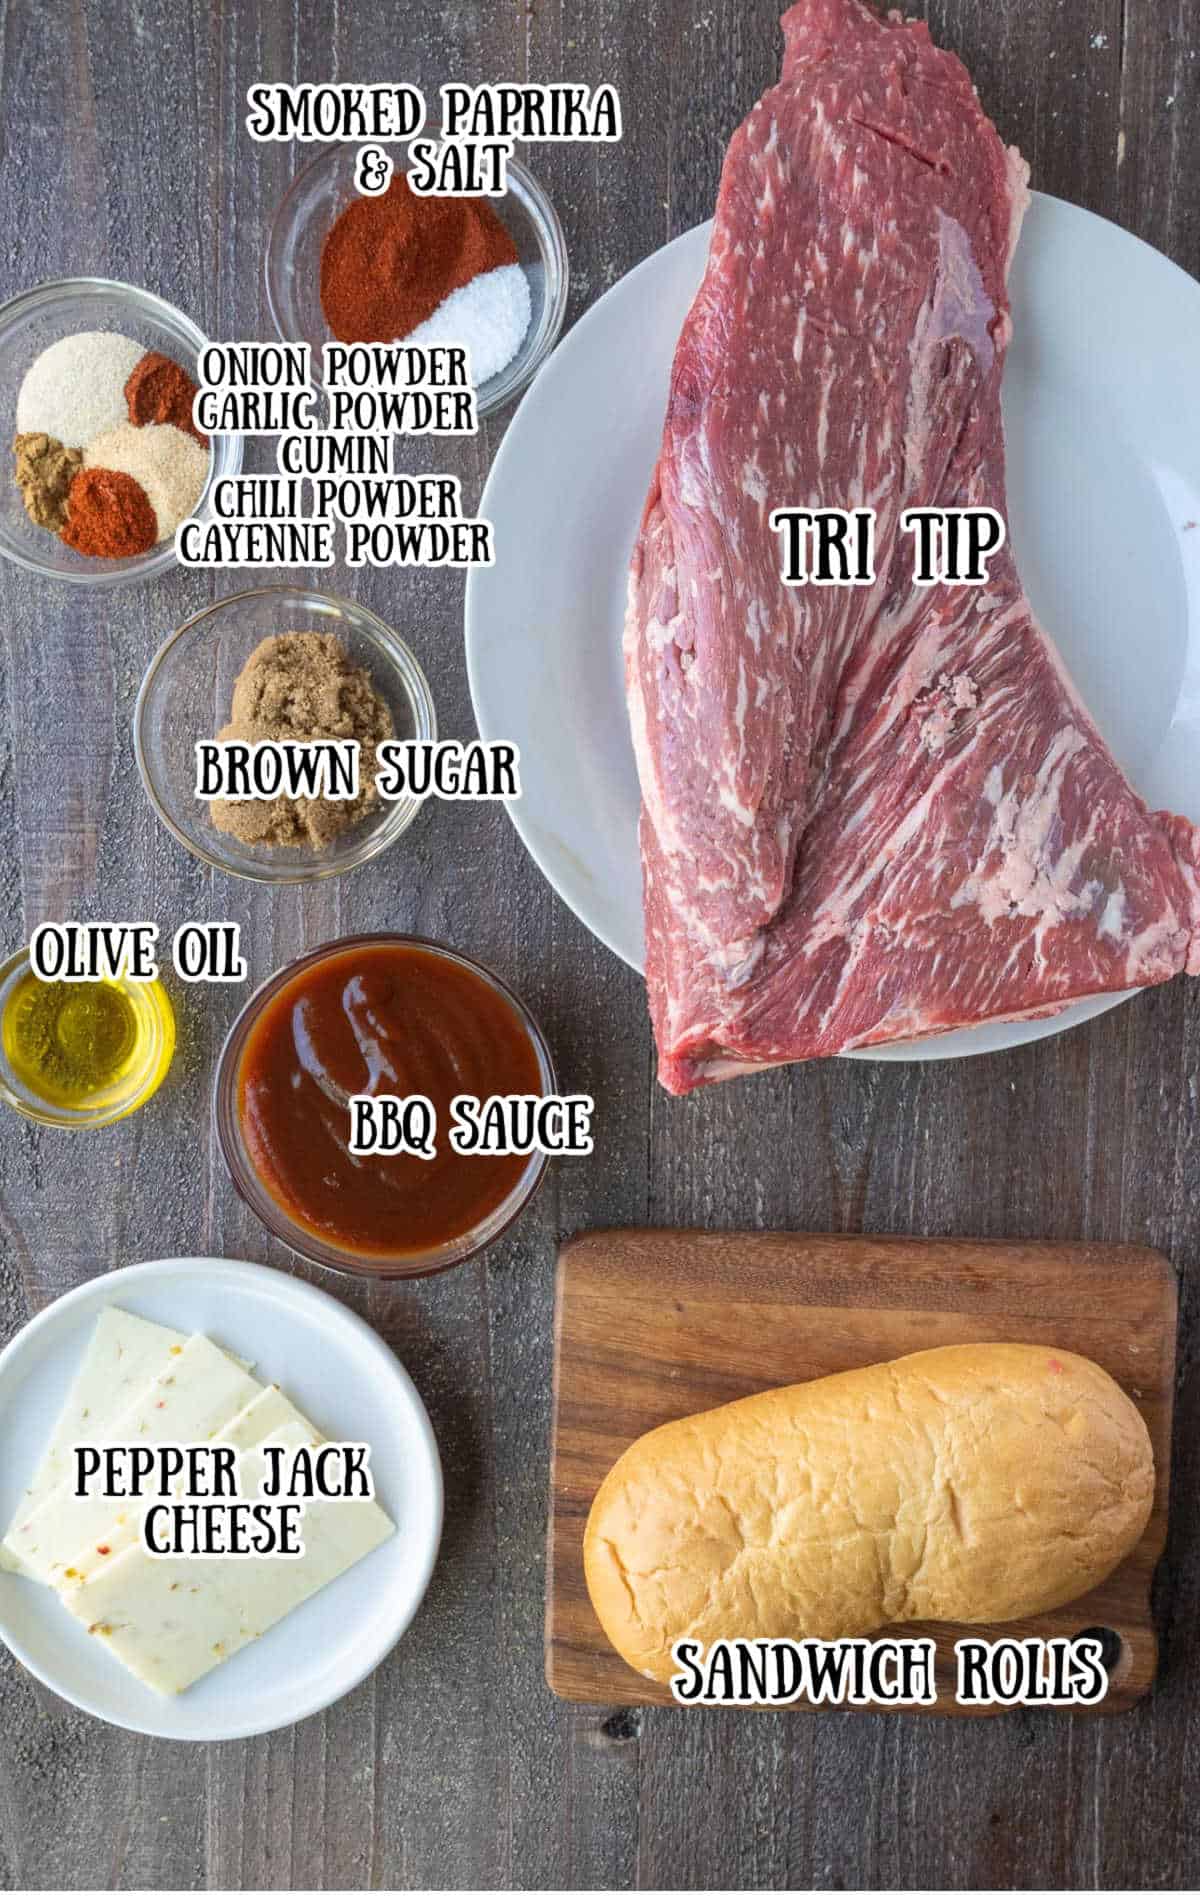 Labelled ingredients for grilled tri tip sandwiches on a counter.